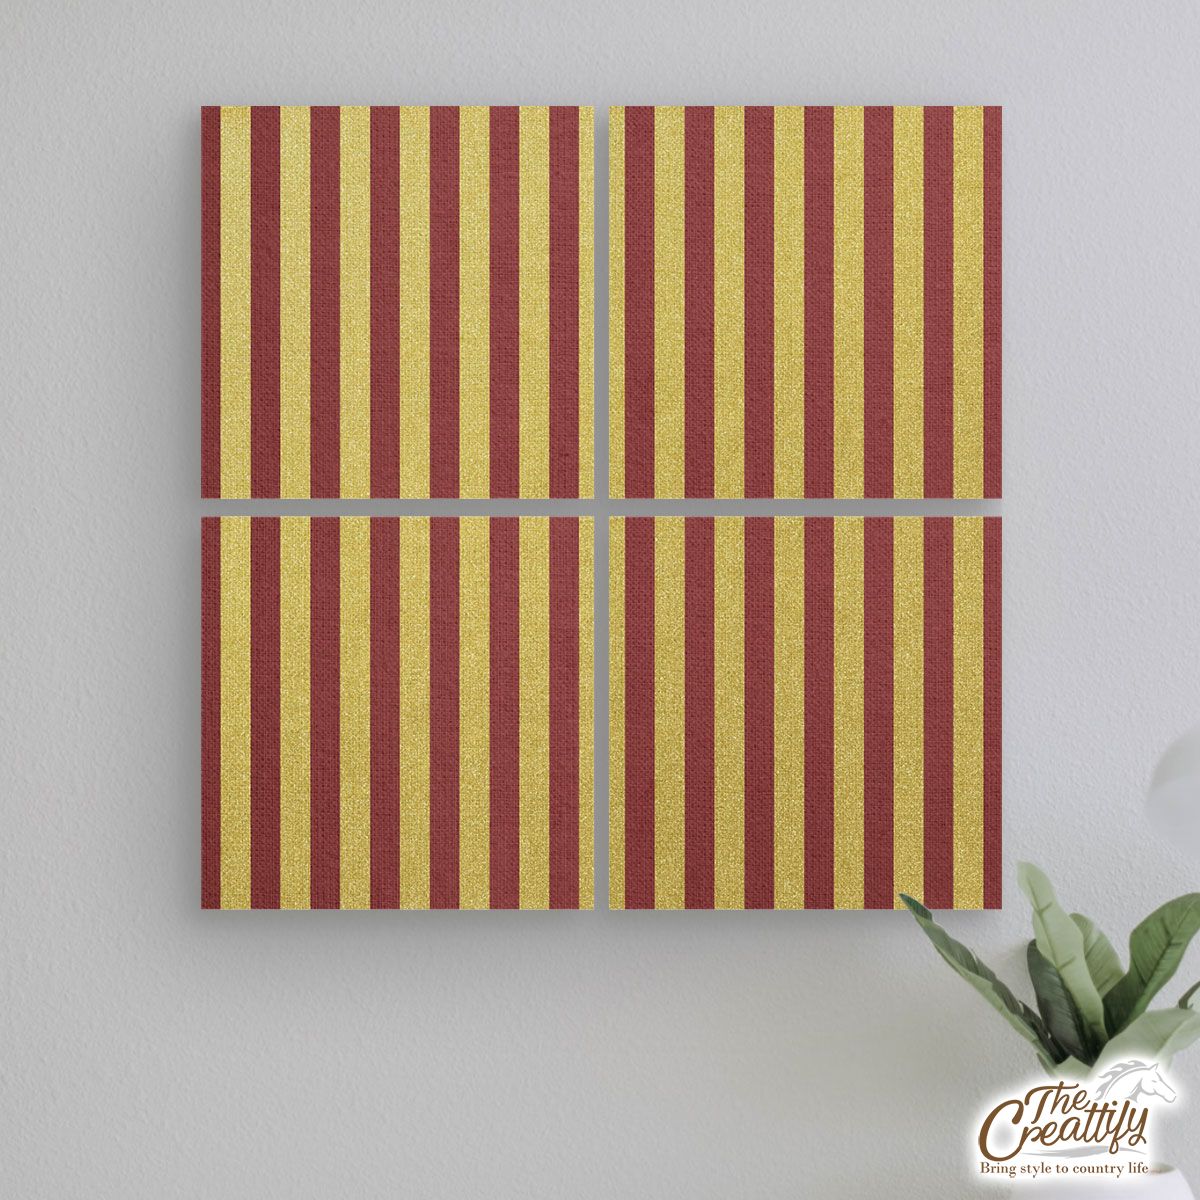 Christmas Gift Ideas, Christmas Gold, Gold Sparkle, Striped Gold On Red Mural With Frame